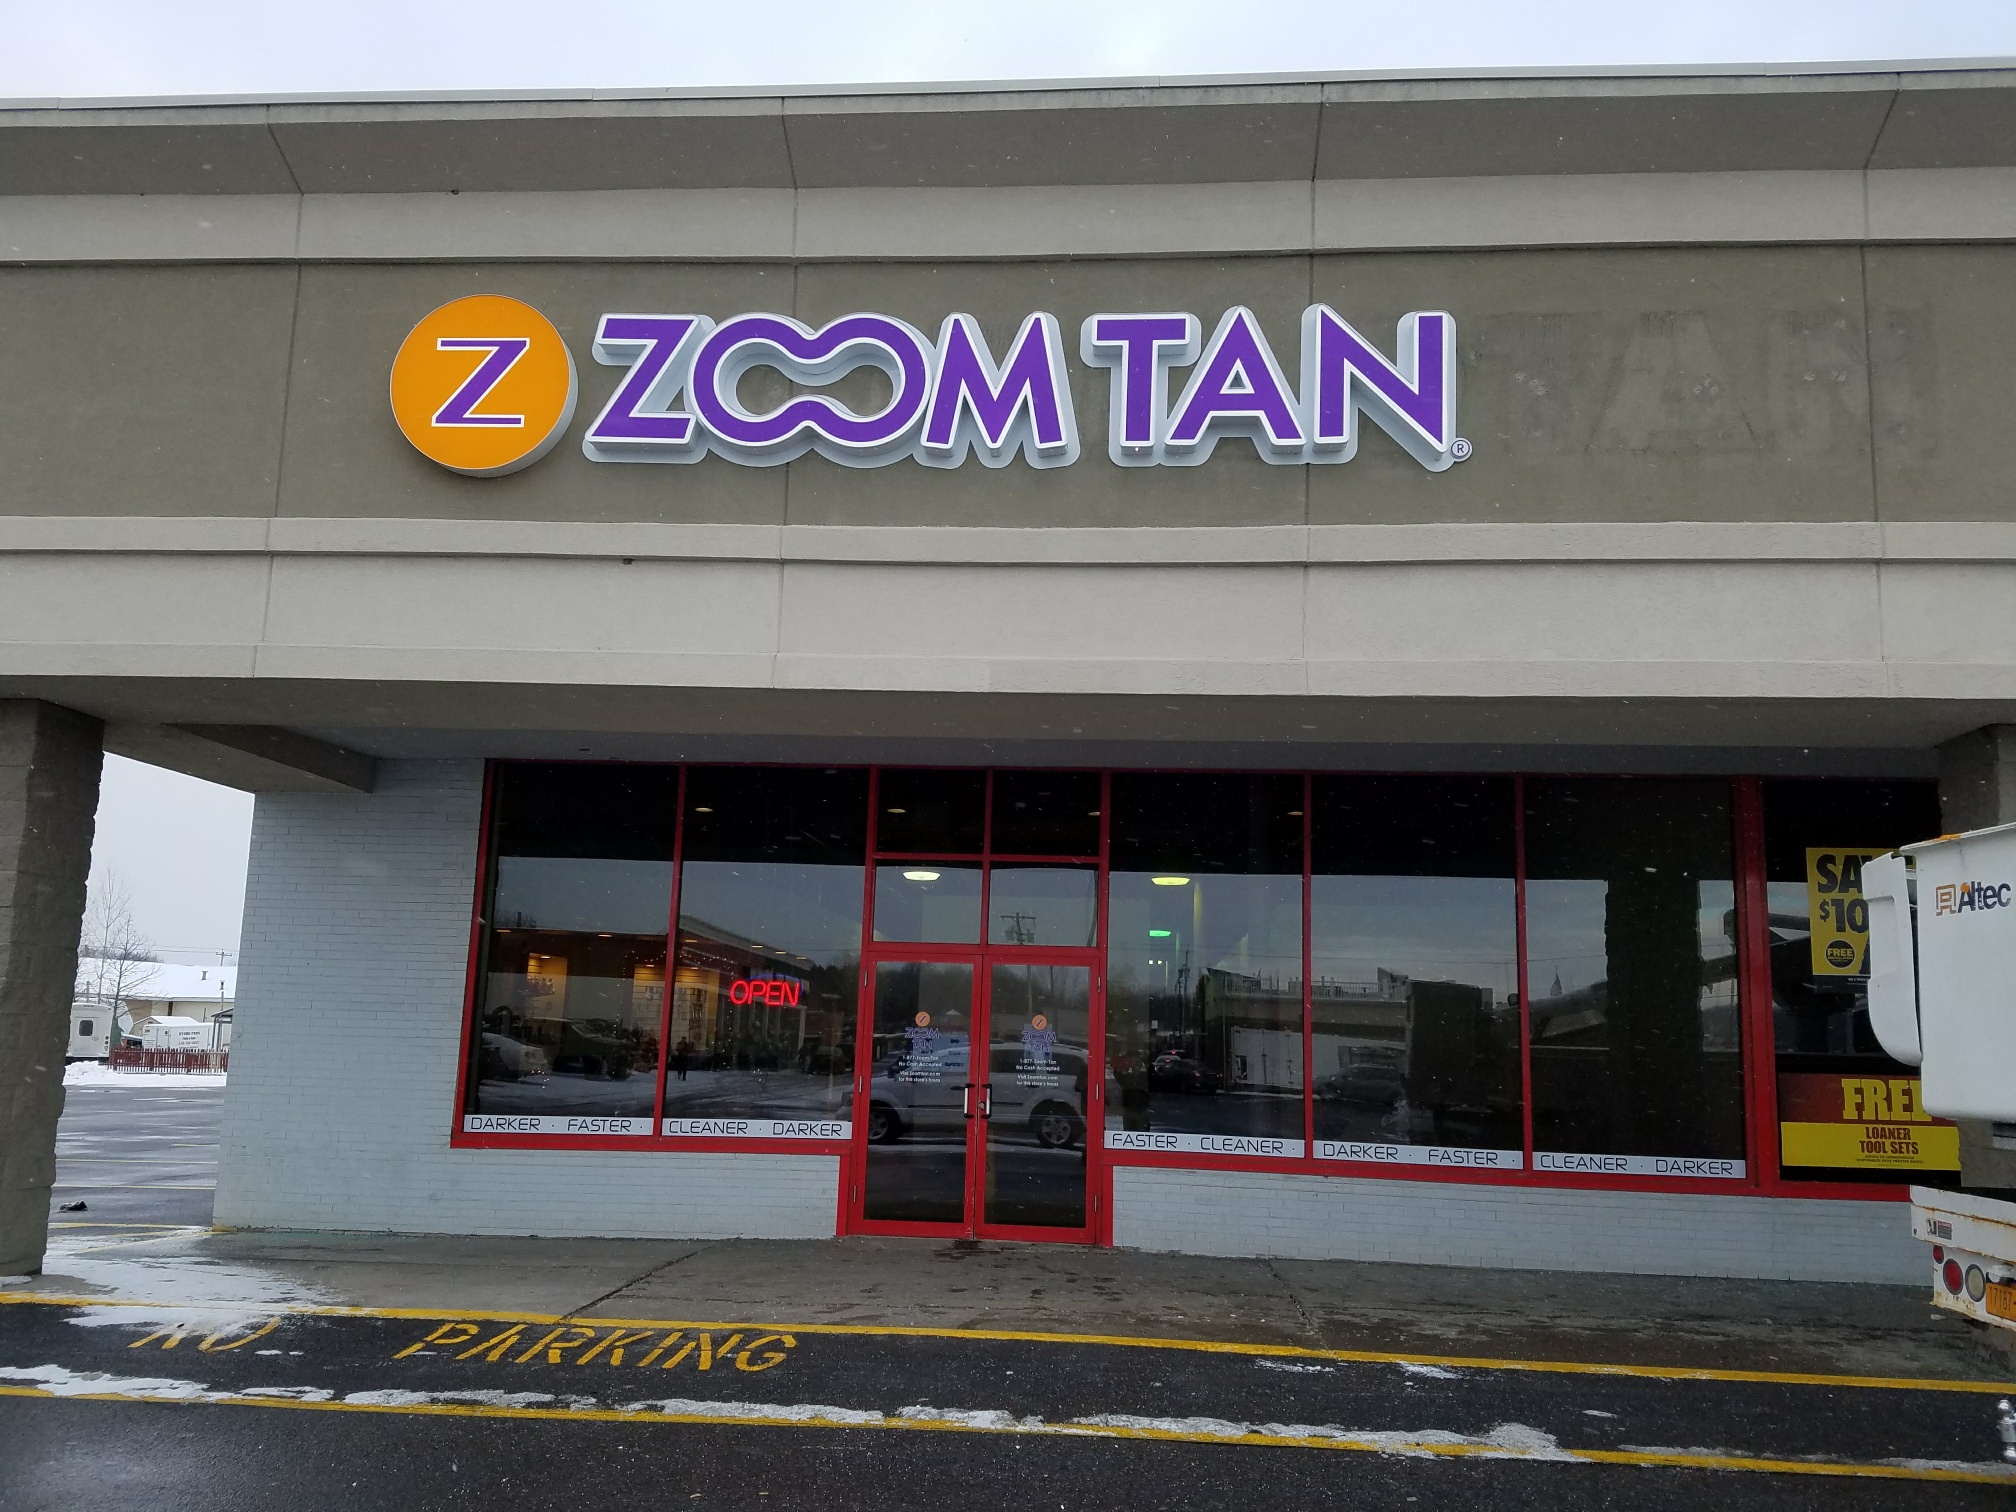 Zoom Tan store front in Johnstown, NY